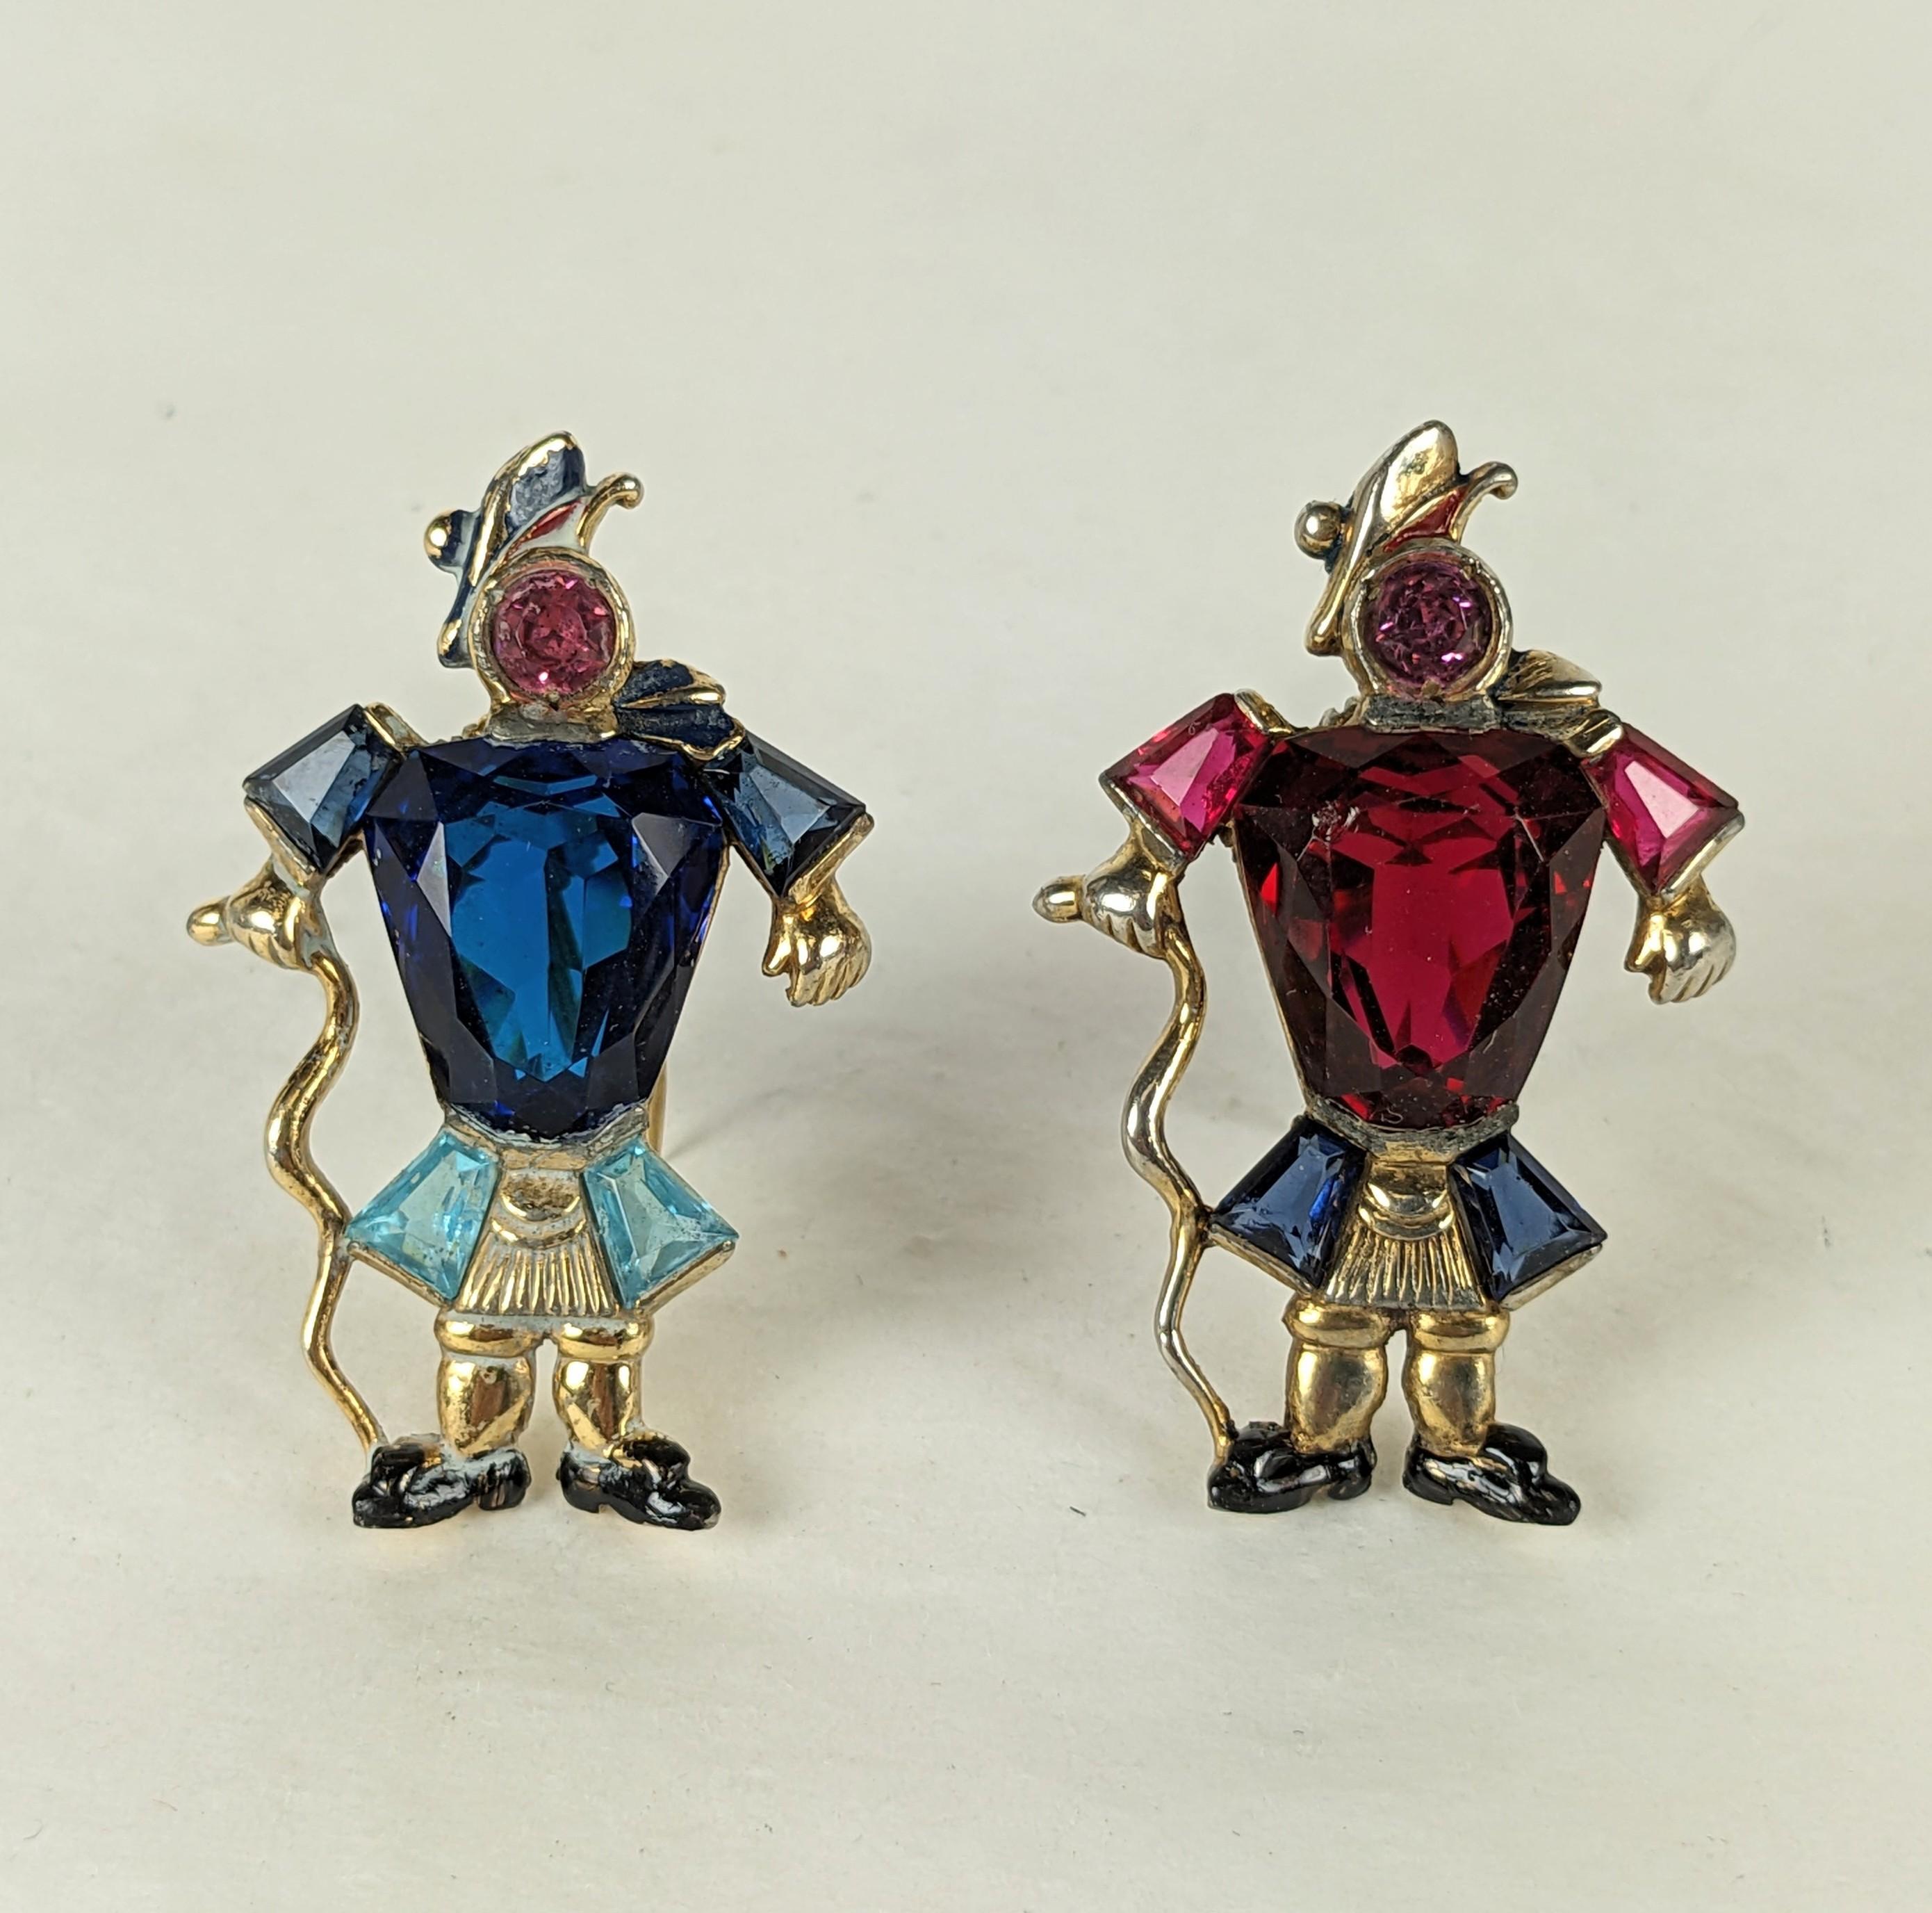 Pair of Charming Mazer Scotsman Motif Clips from the 1930's. Each figure in traditional dress set with unusual cut paste stones and enamel accents. Each 1.75